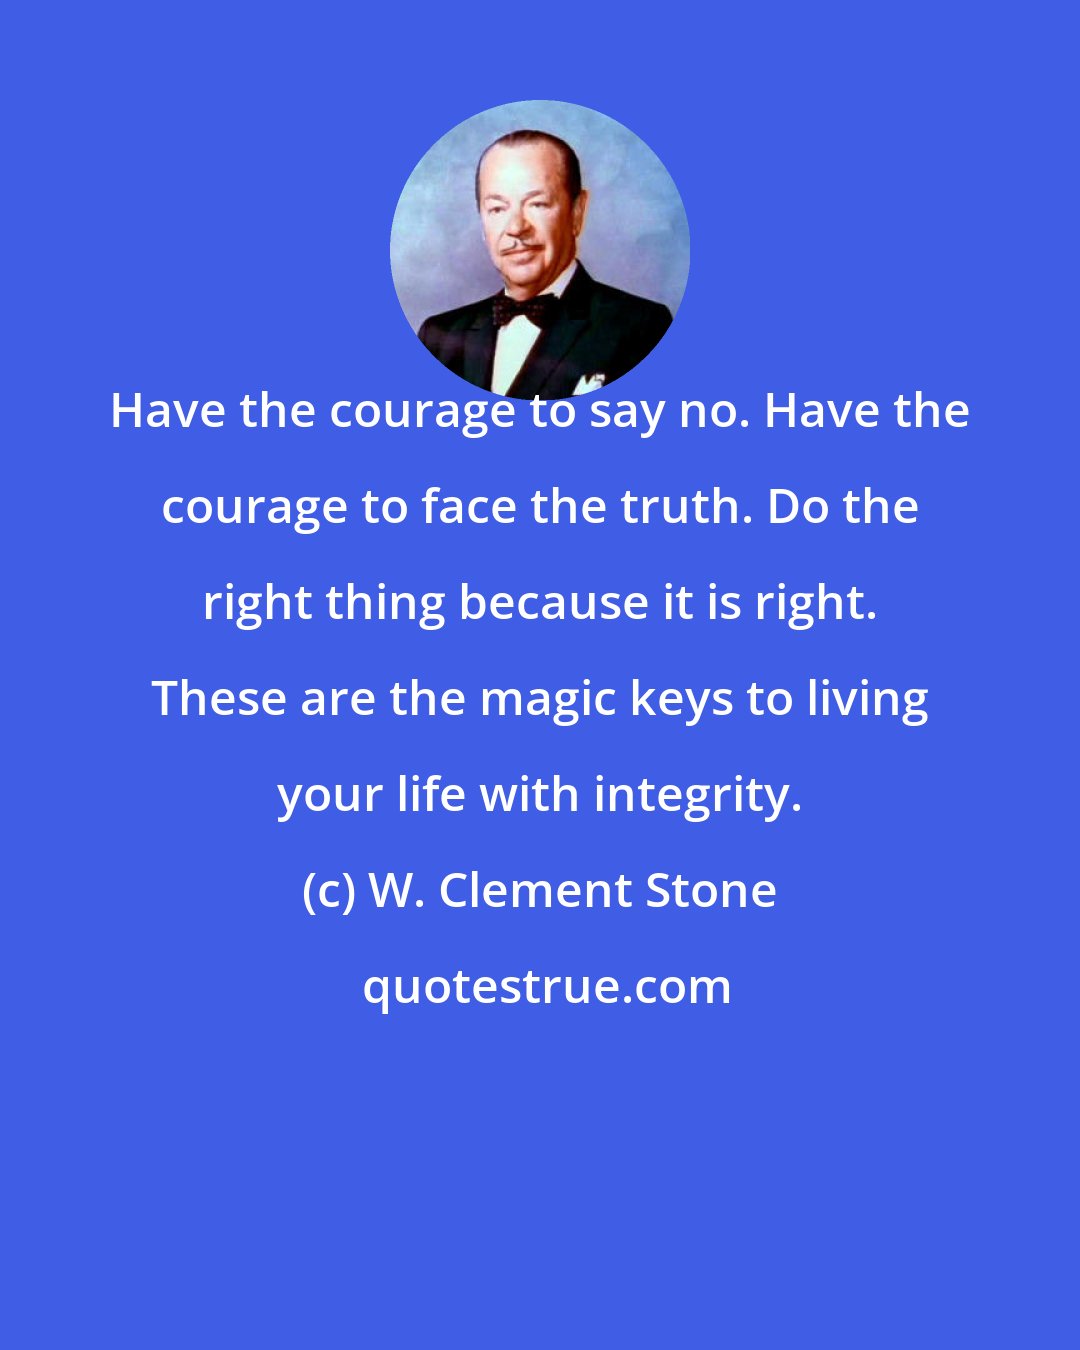 W. Clement Stone: Have the courage to say no. Have the courage to face the truth. Do the right thing because it is right. These are the magic keys to living your life with integrity.